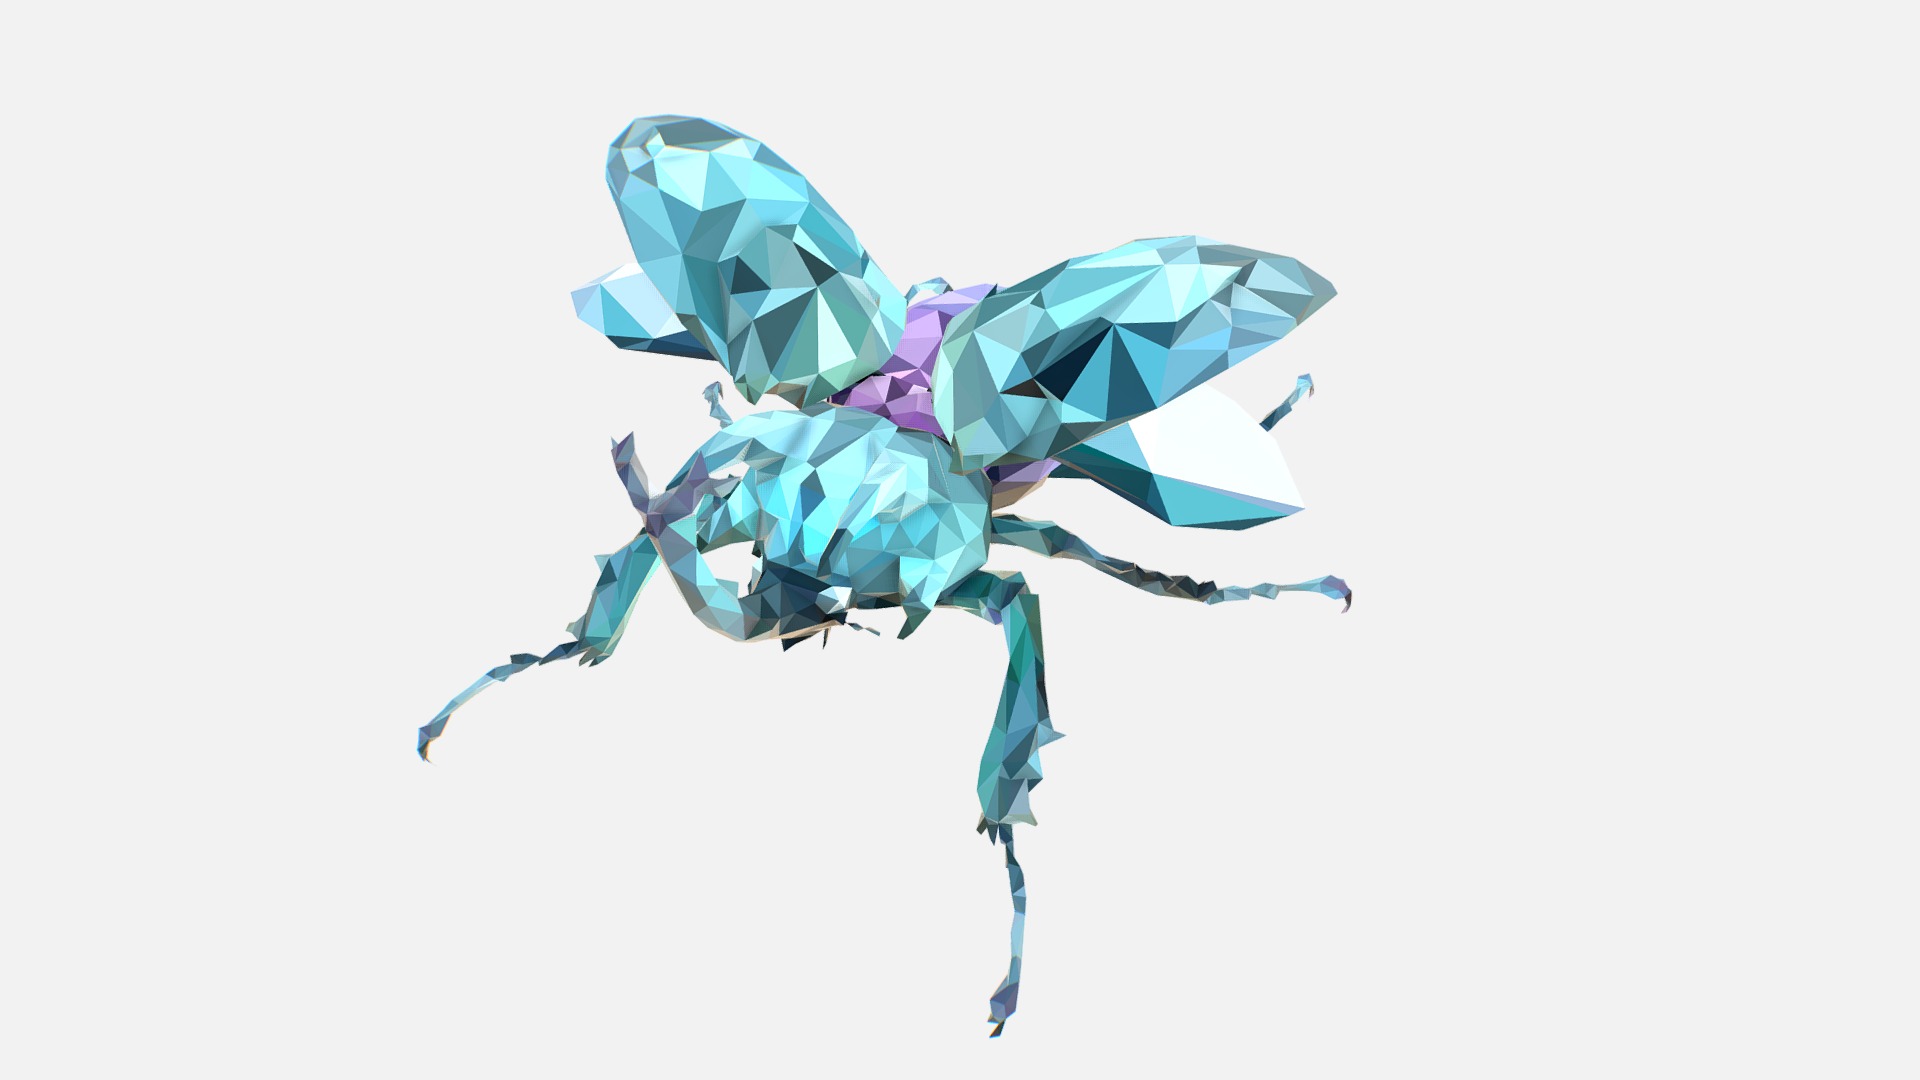 3D model low poly art white Giant Beetle insect - This is a 3D model of the low poly art white Giant Beetle insect. The 3D model is about a blue and white butterfly.